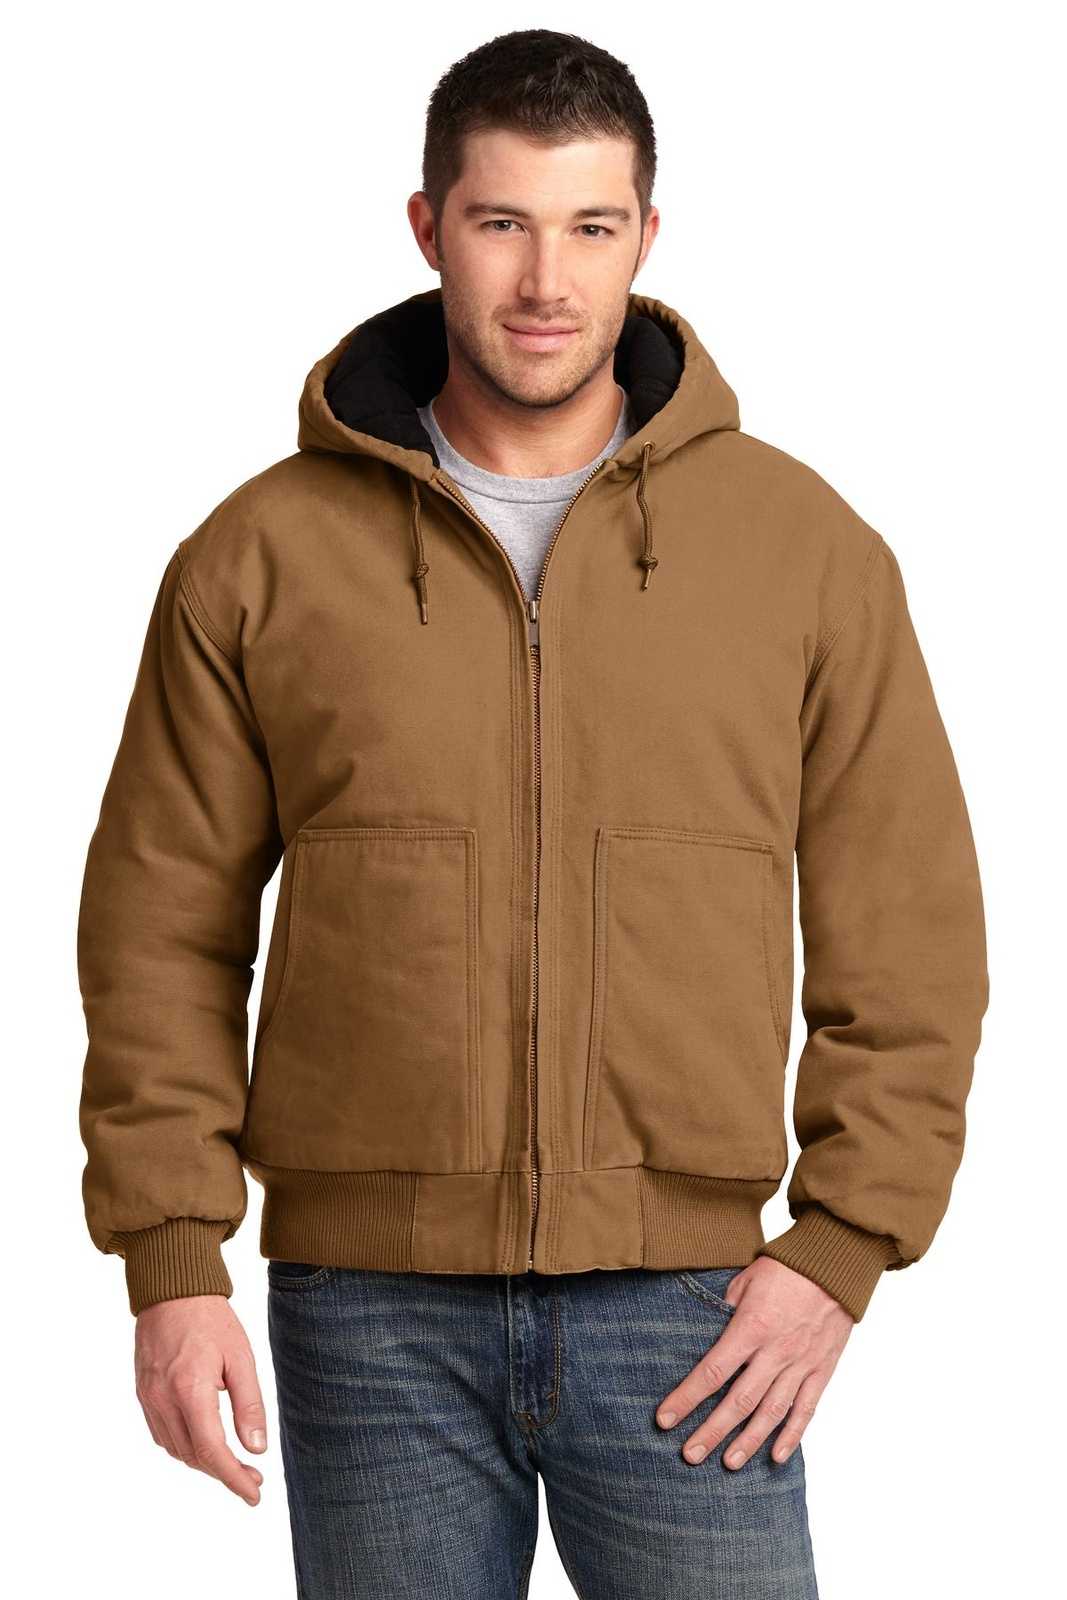 CornerStone CSJ41 Washed Duck Cloth Insulated Hooded Work Jacket - Duck Brown - HIT a Double - 1